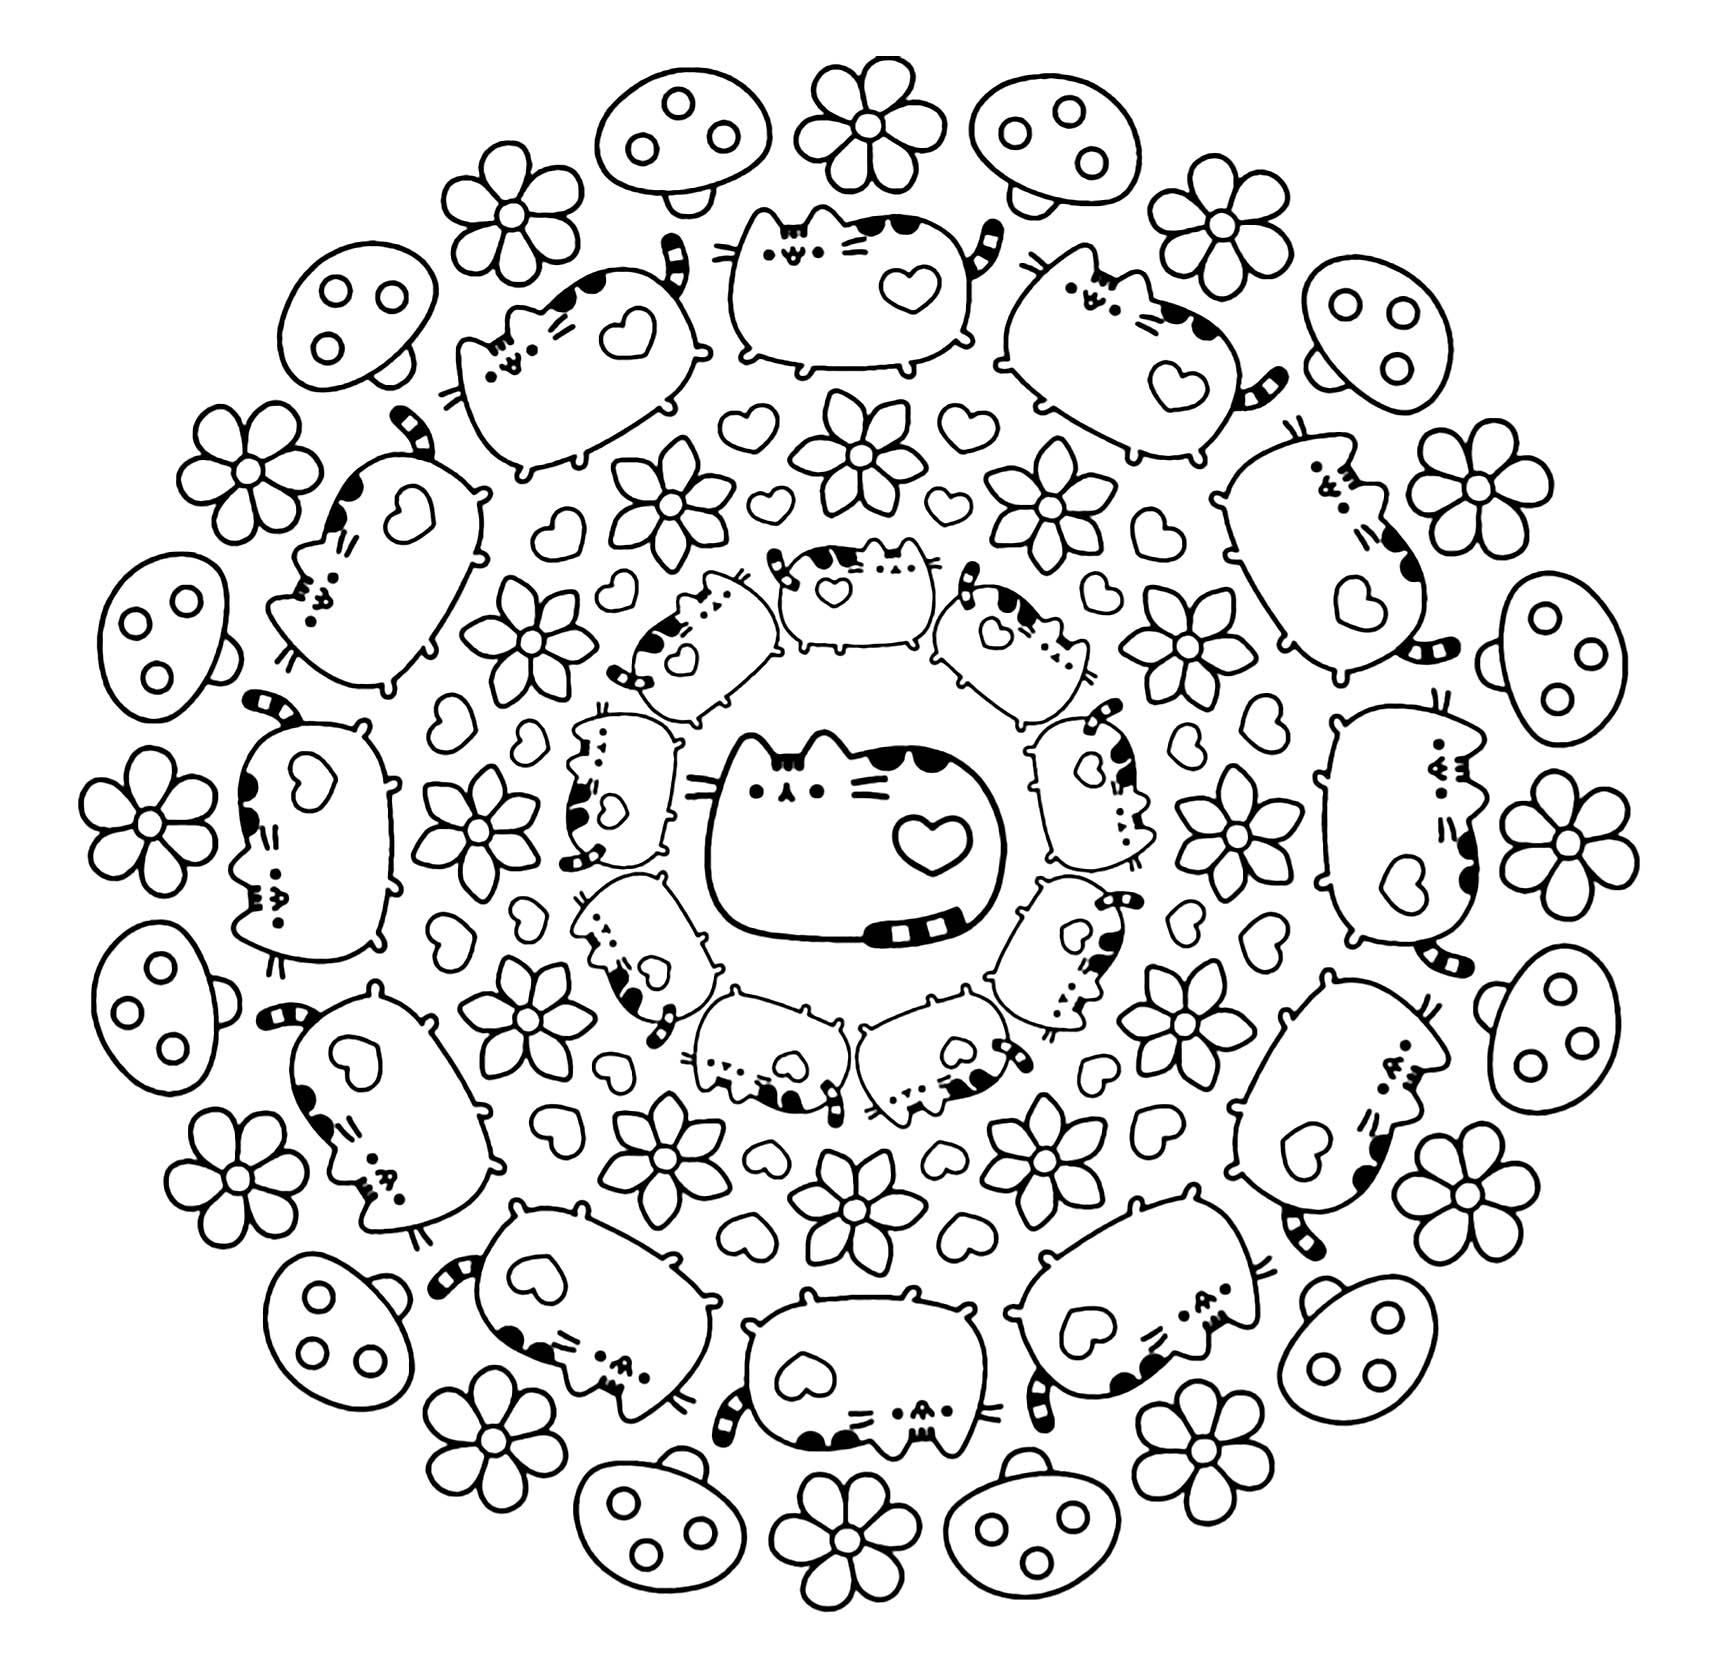 Pusheen cats. A beautiful Mandala coloring page, of great quality and originality. It's up to you to choose the most appropriate colors. You must clear your mind and allow yourself to forget all your worries and responsibilities.